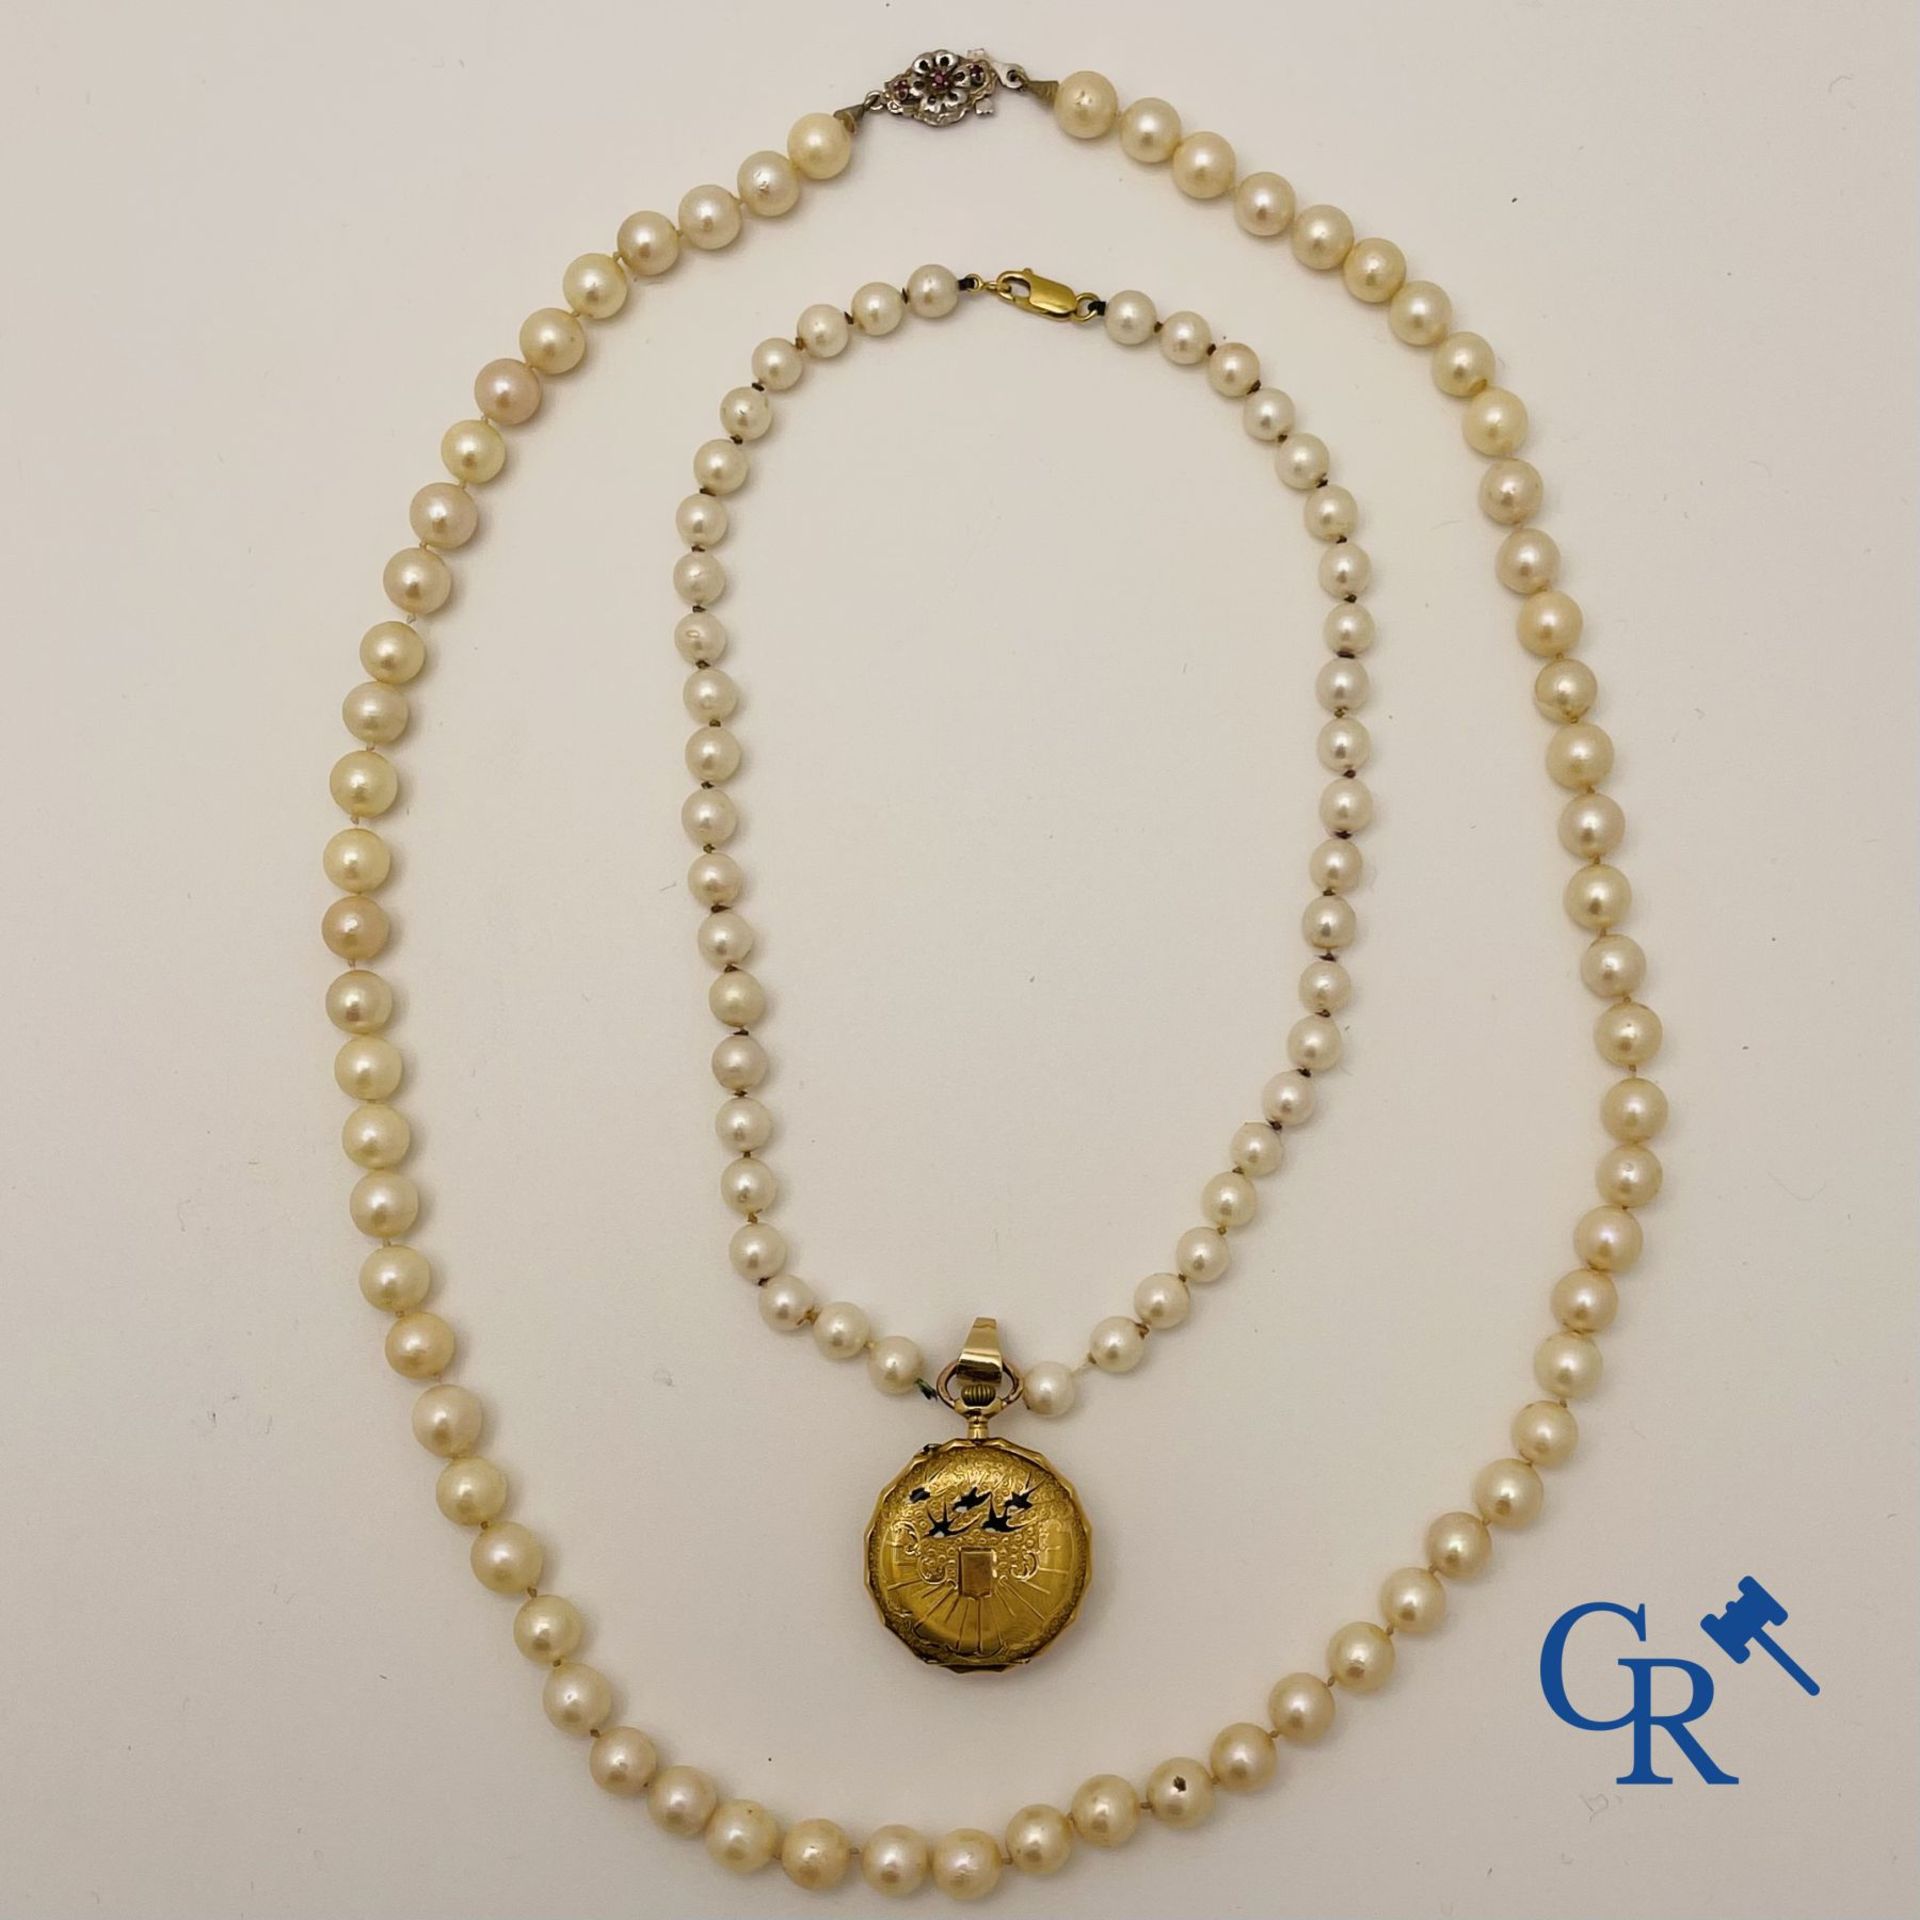 Jewel/Watches: Pearl necklace with clasp in white gold 18K and a women's pocket watch in gold 18K. - Bild 2 aus 7